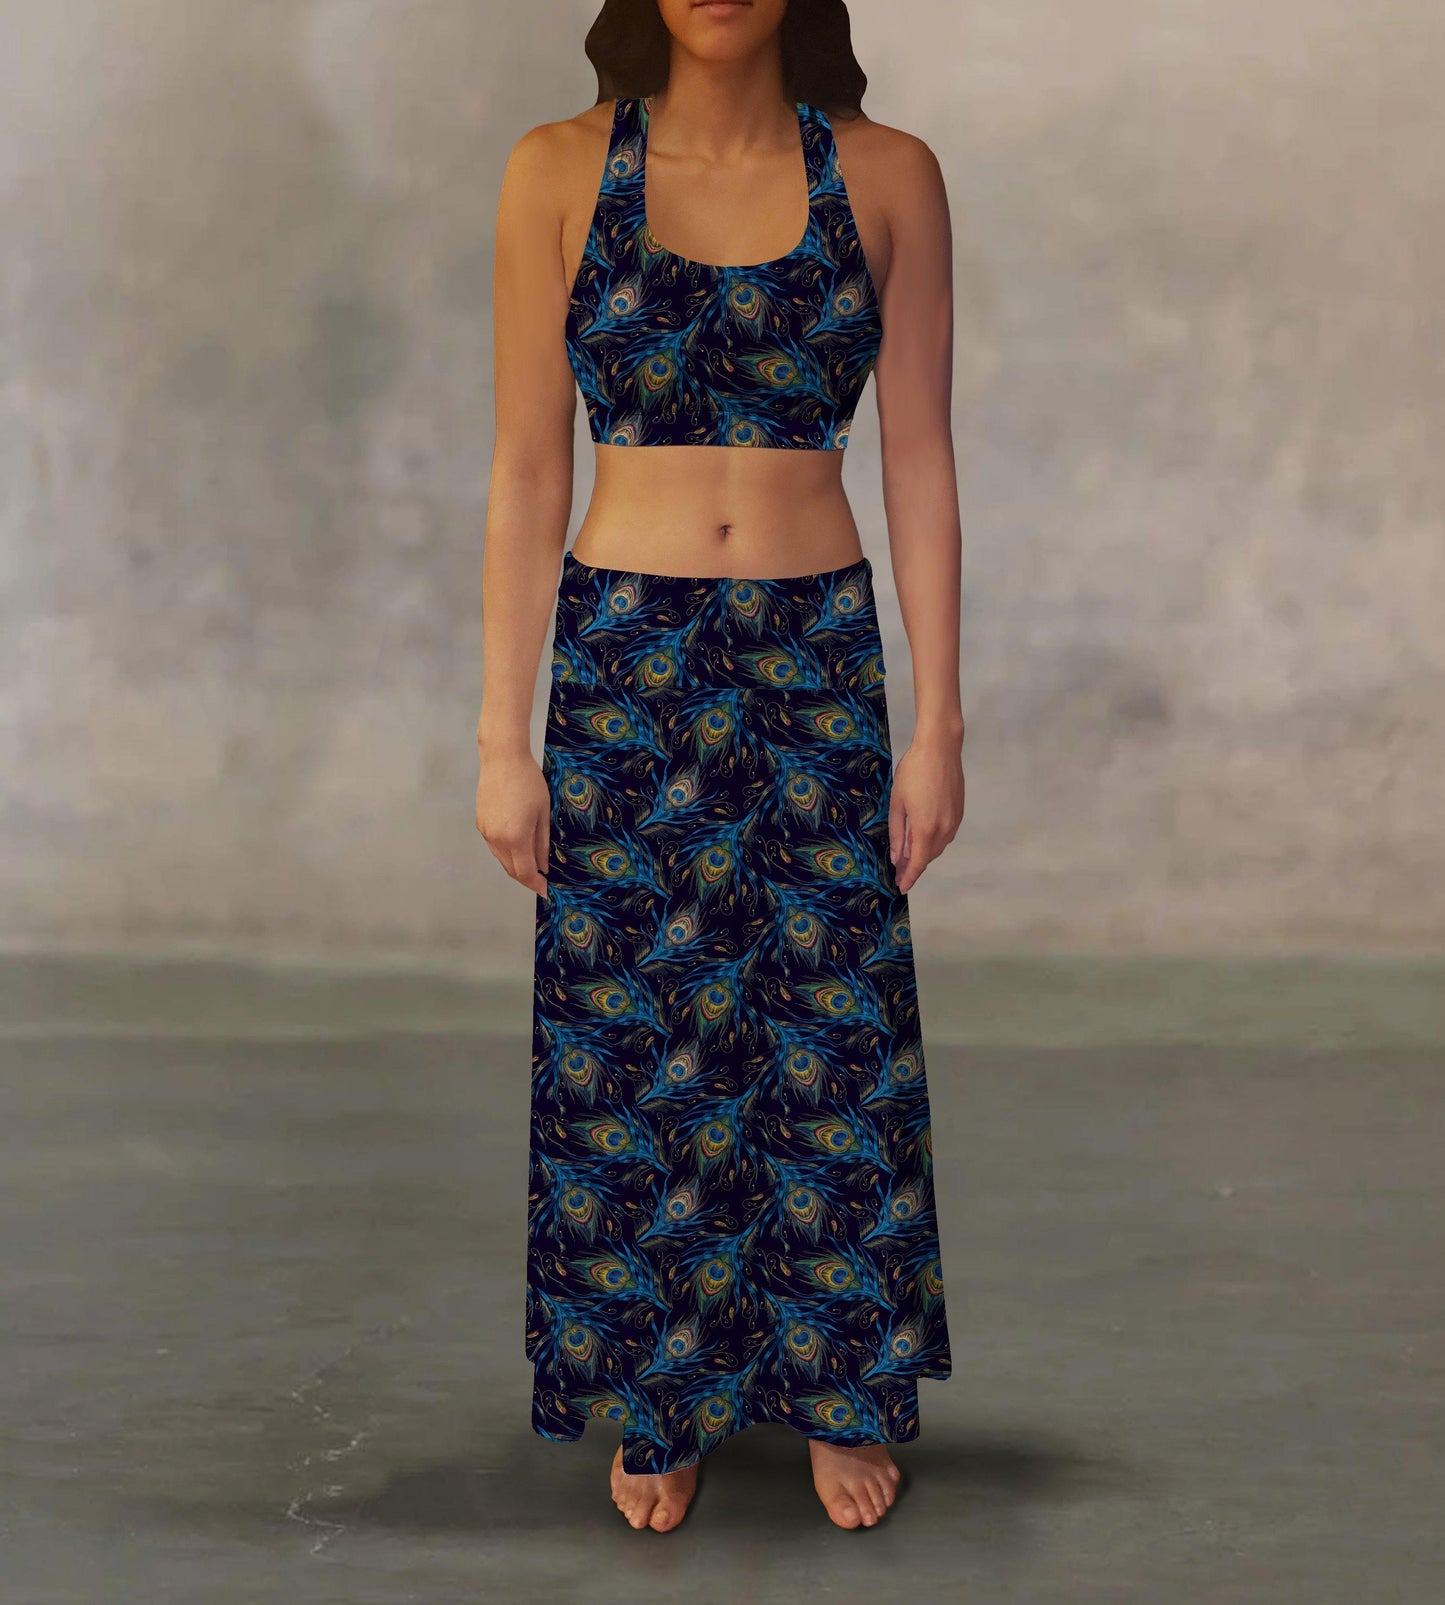 Peacock Feathers Maxi Skirt